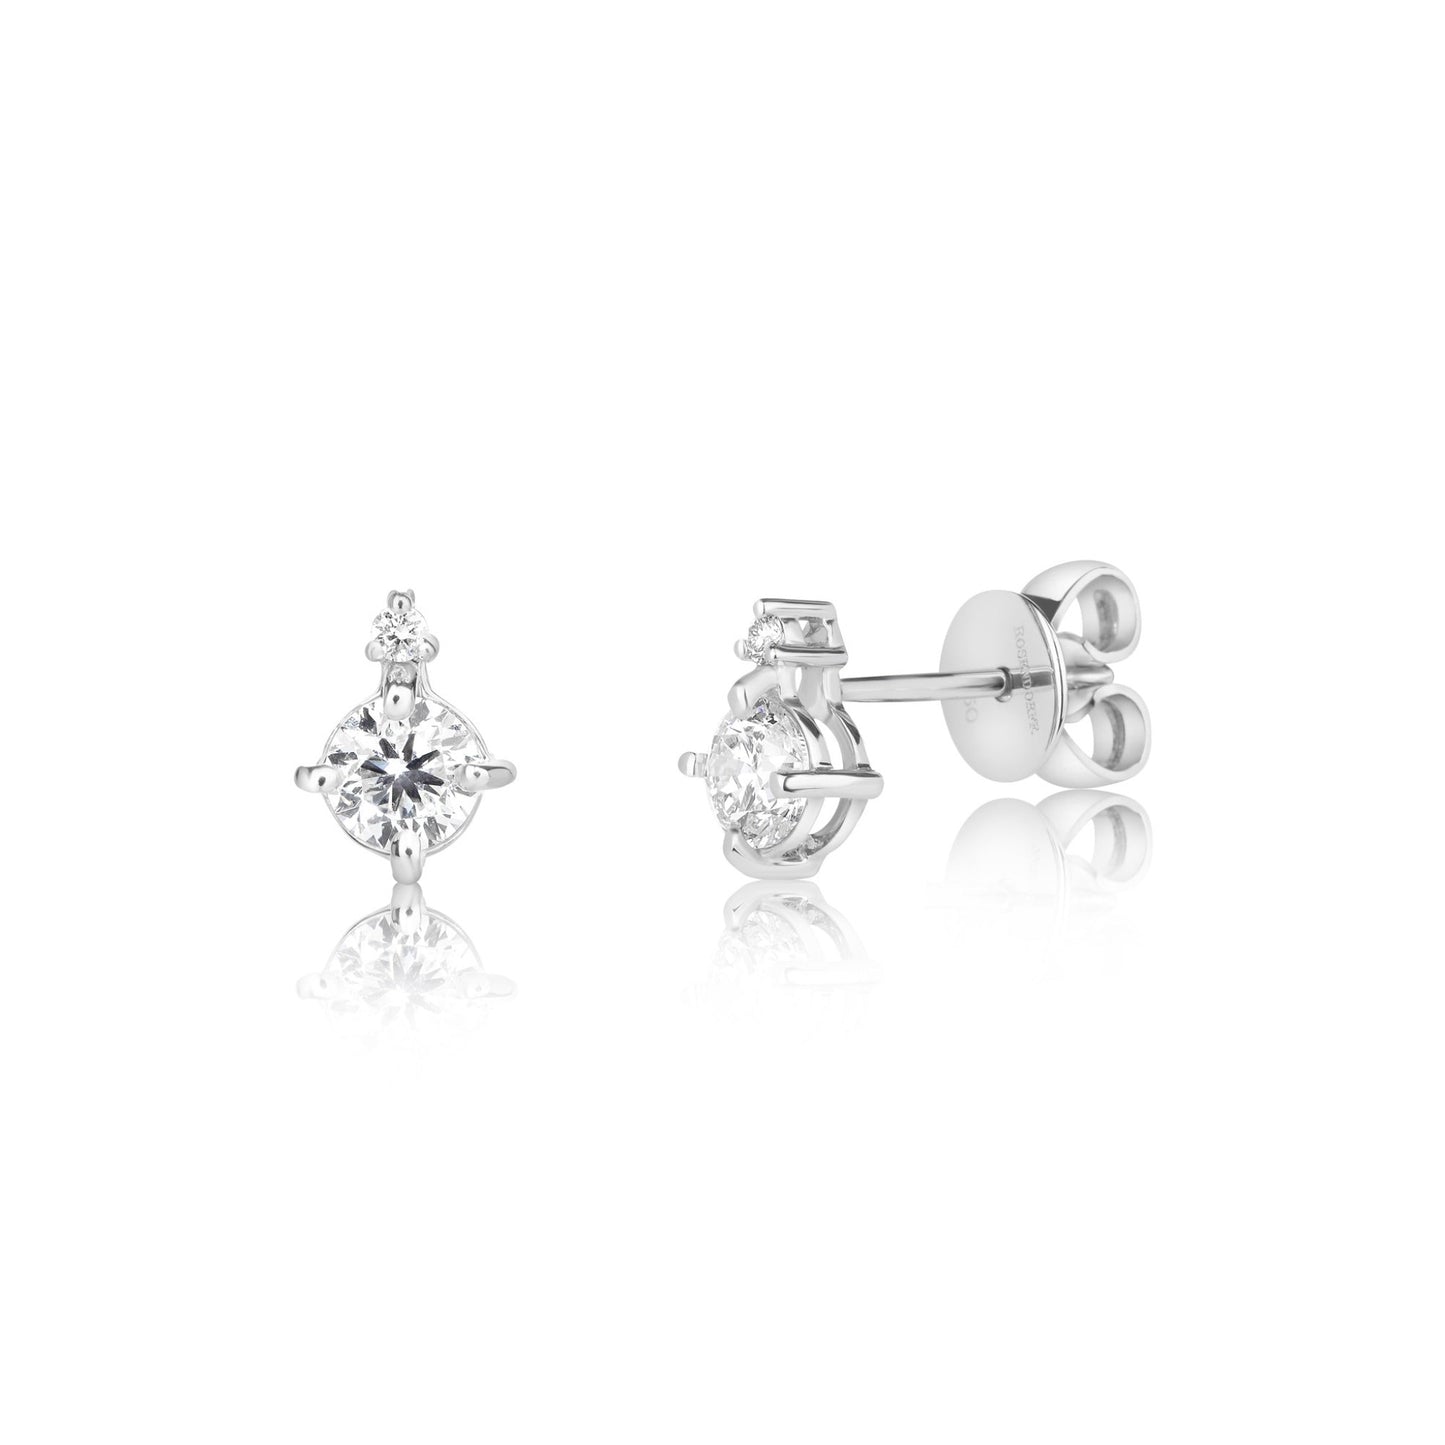 Solitaire 0.60ct Diamond 4 Claw Stud Earrings | 18ct White Gold